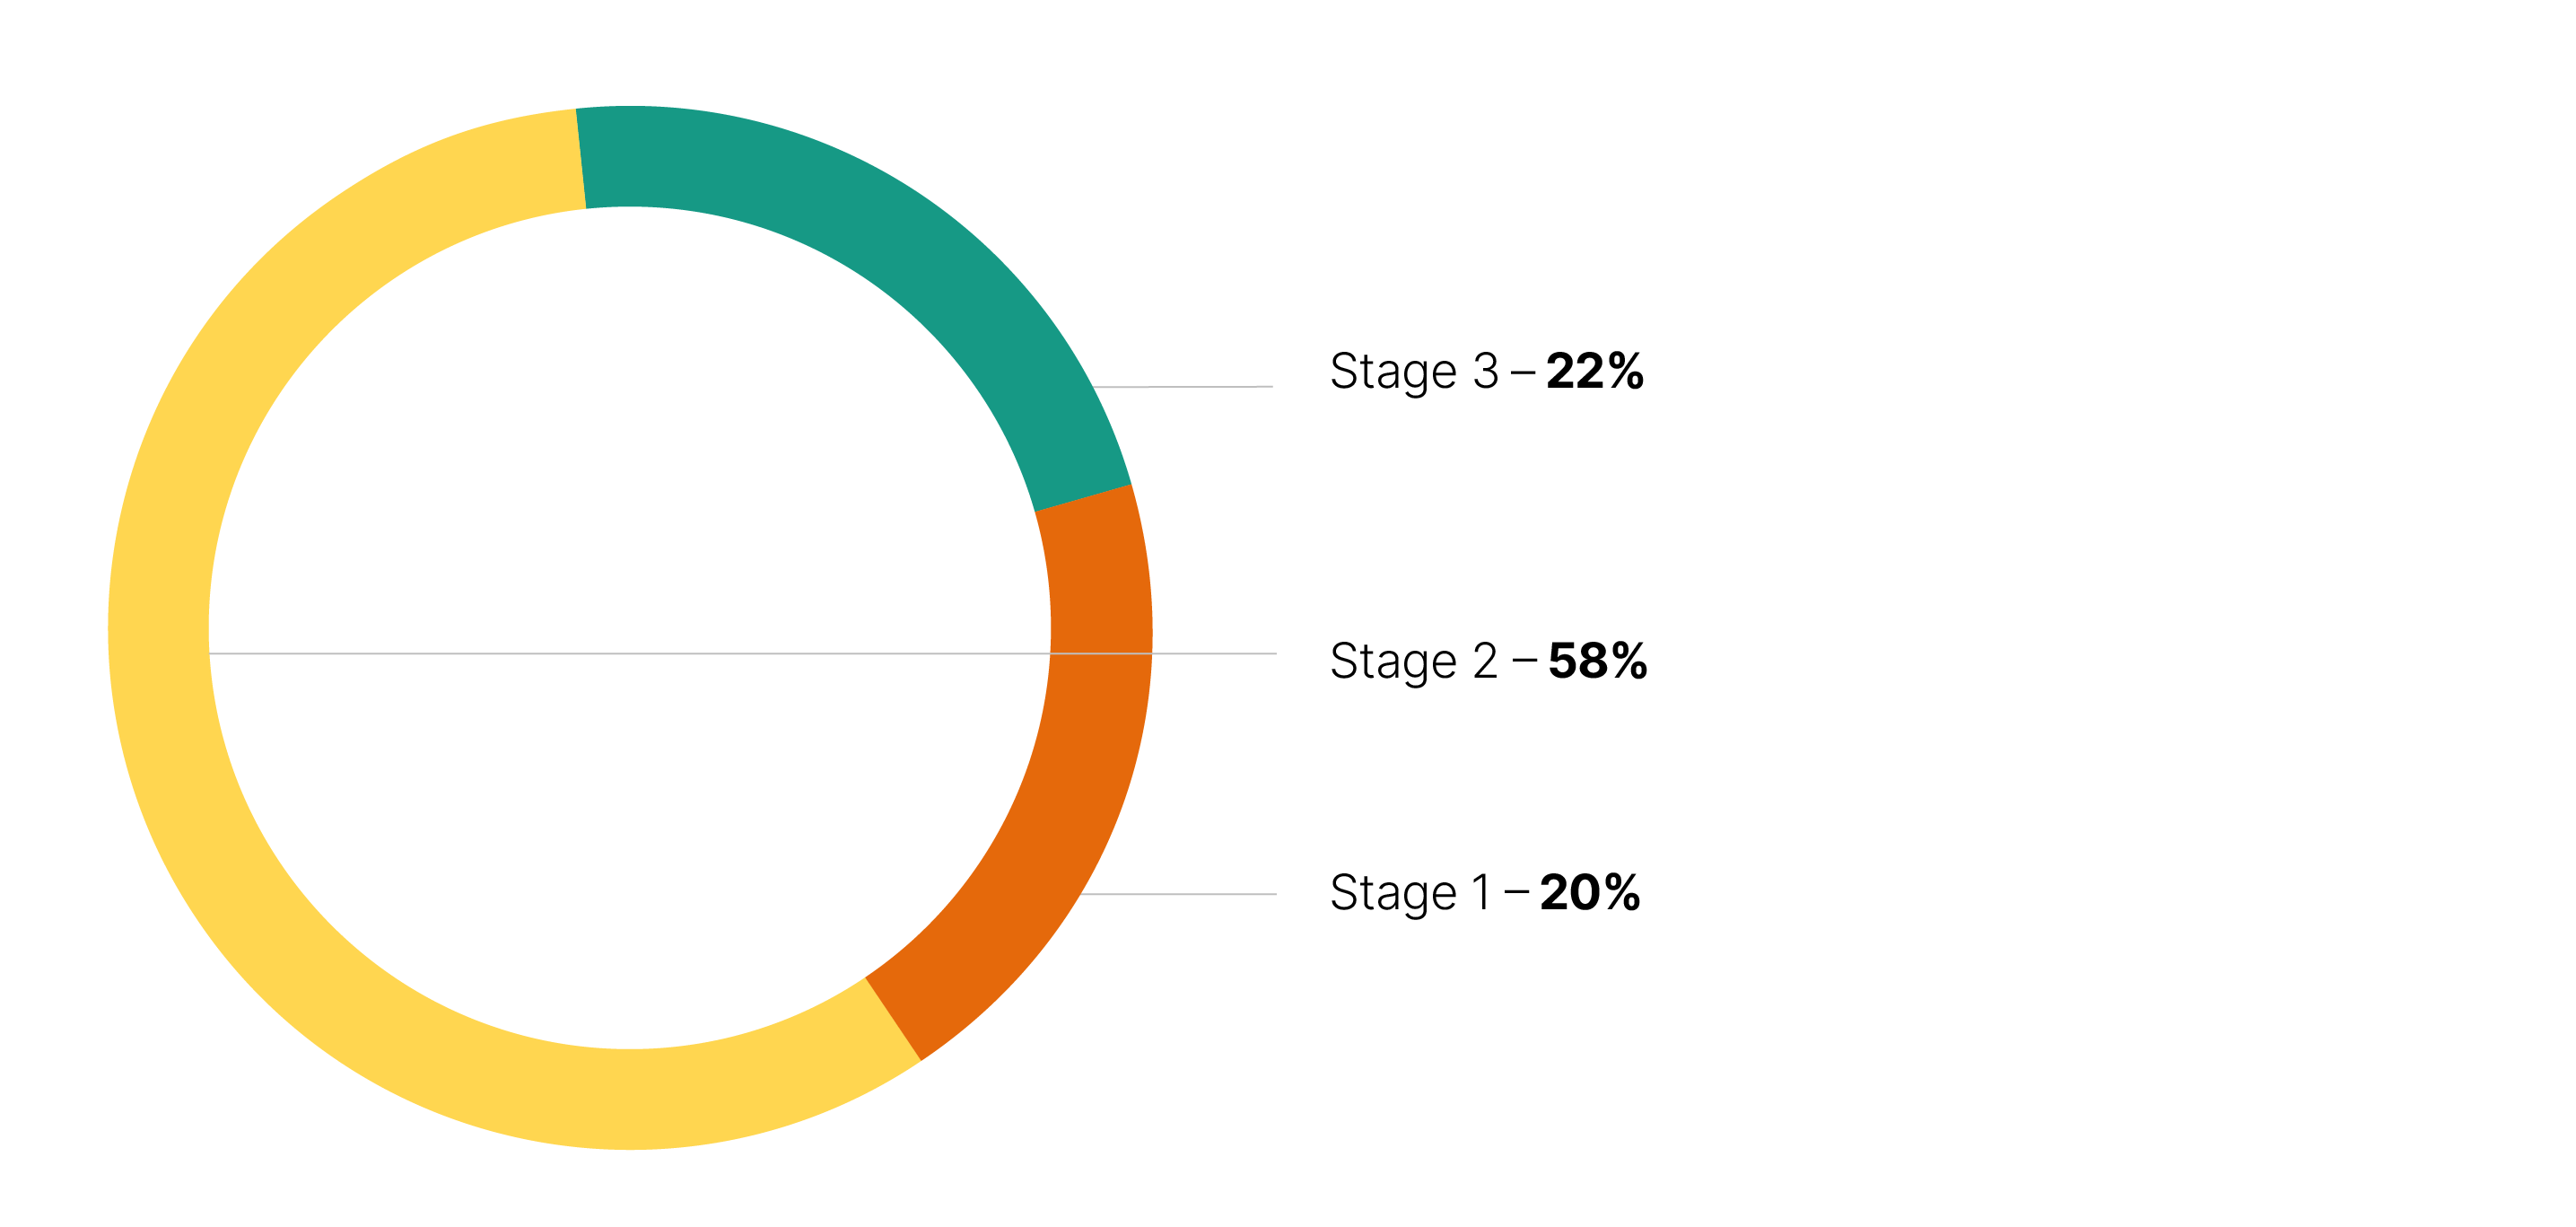 Pie graph showing percentage ratings, 22% stage 3, 58% stage 2, 20% stage 1.